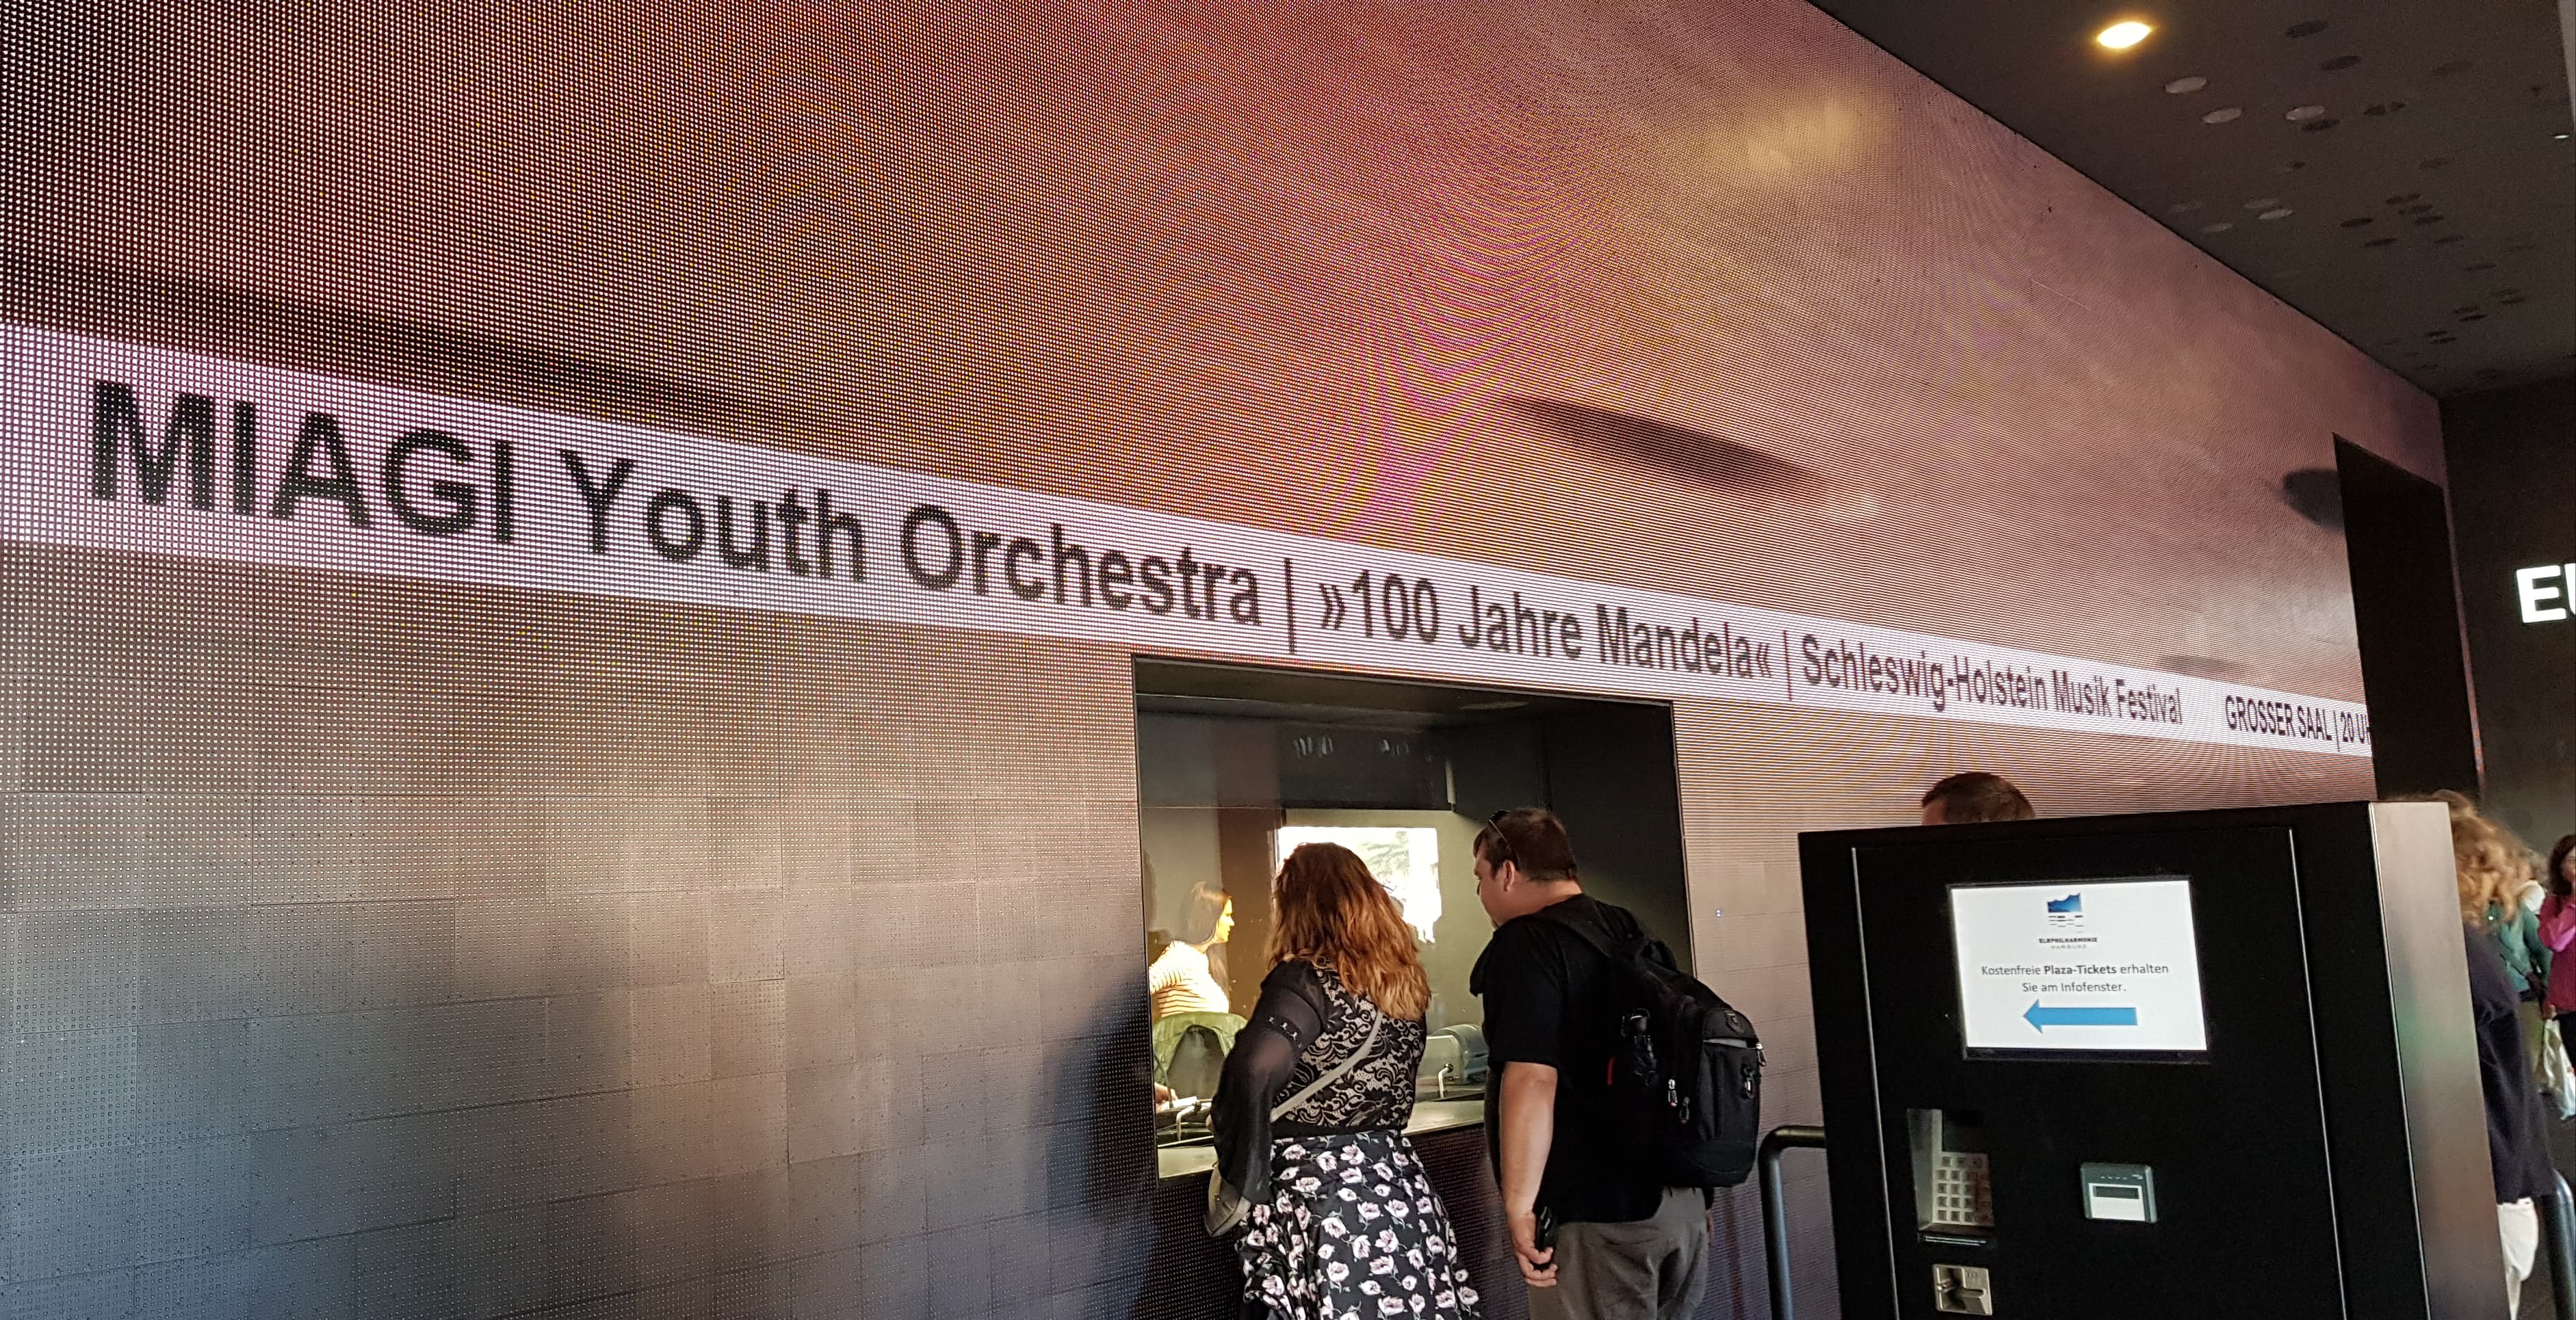 At the Elbphilharmonie Box Office before the MIAGI Concert